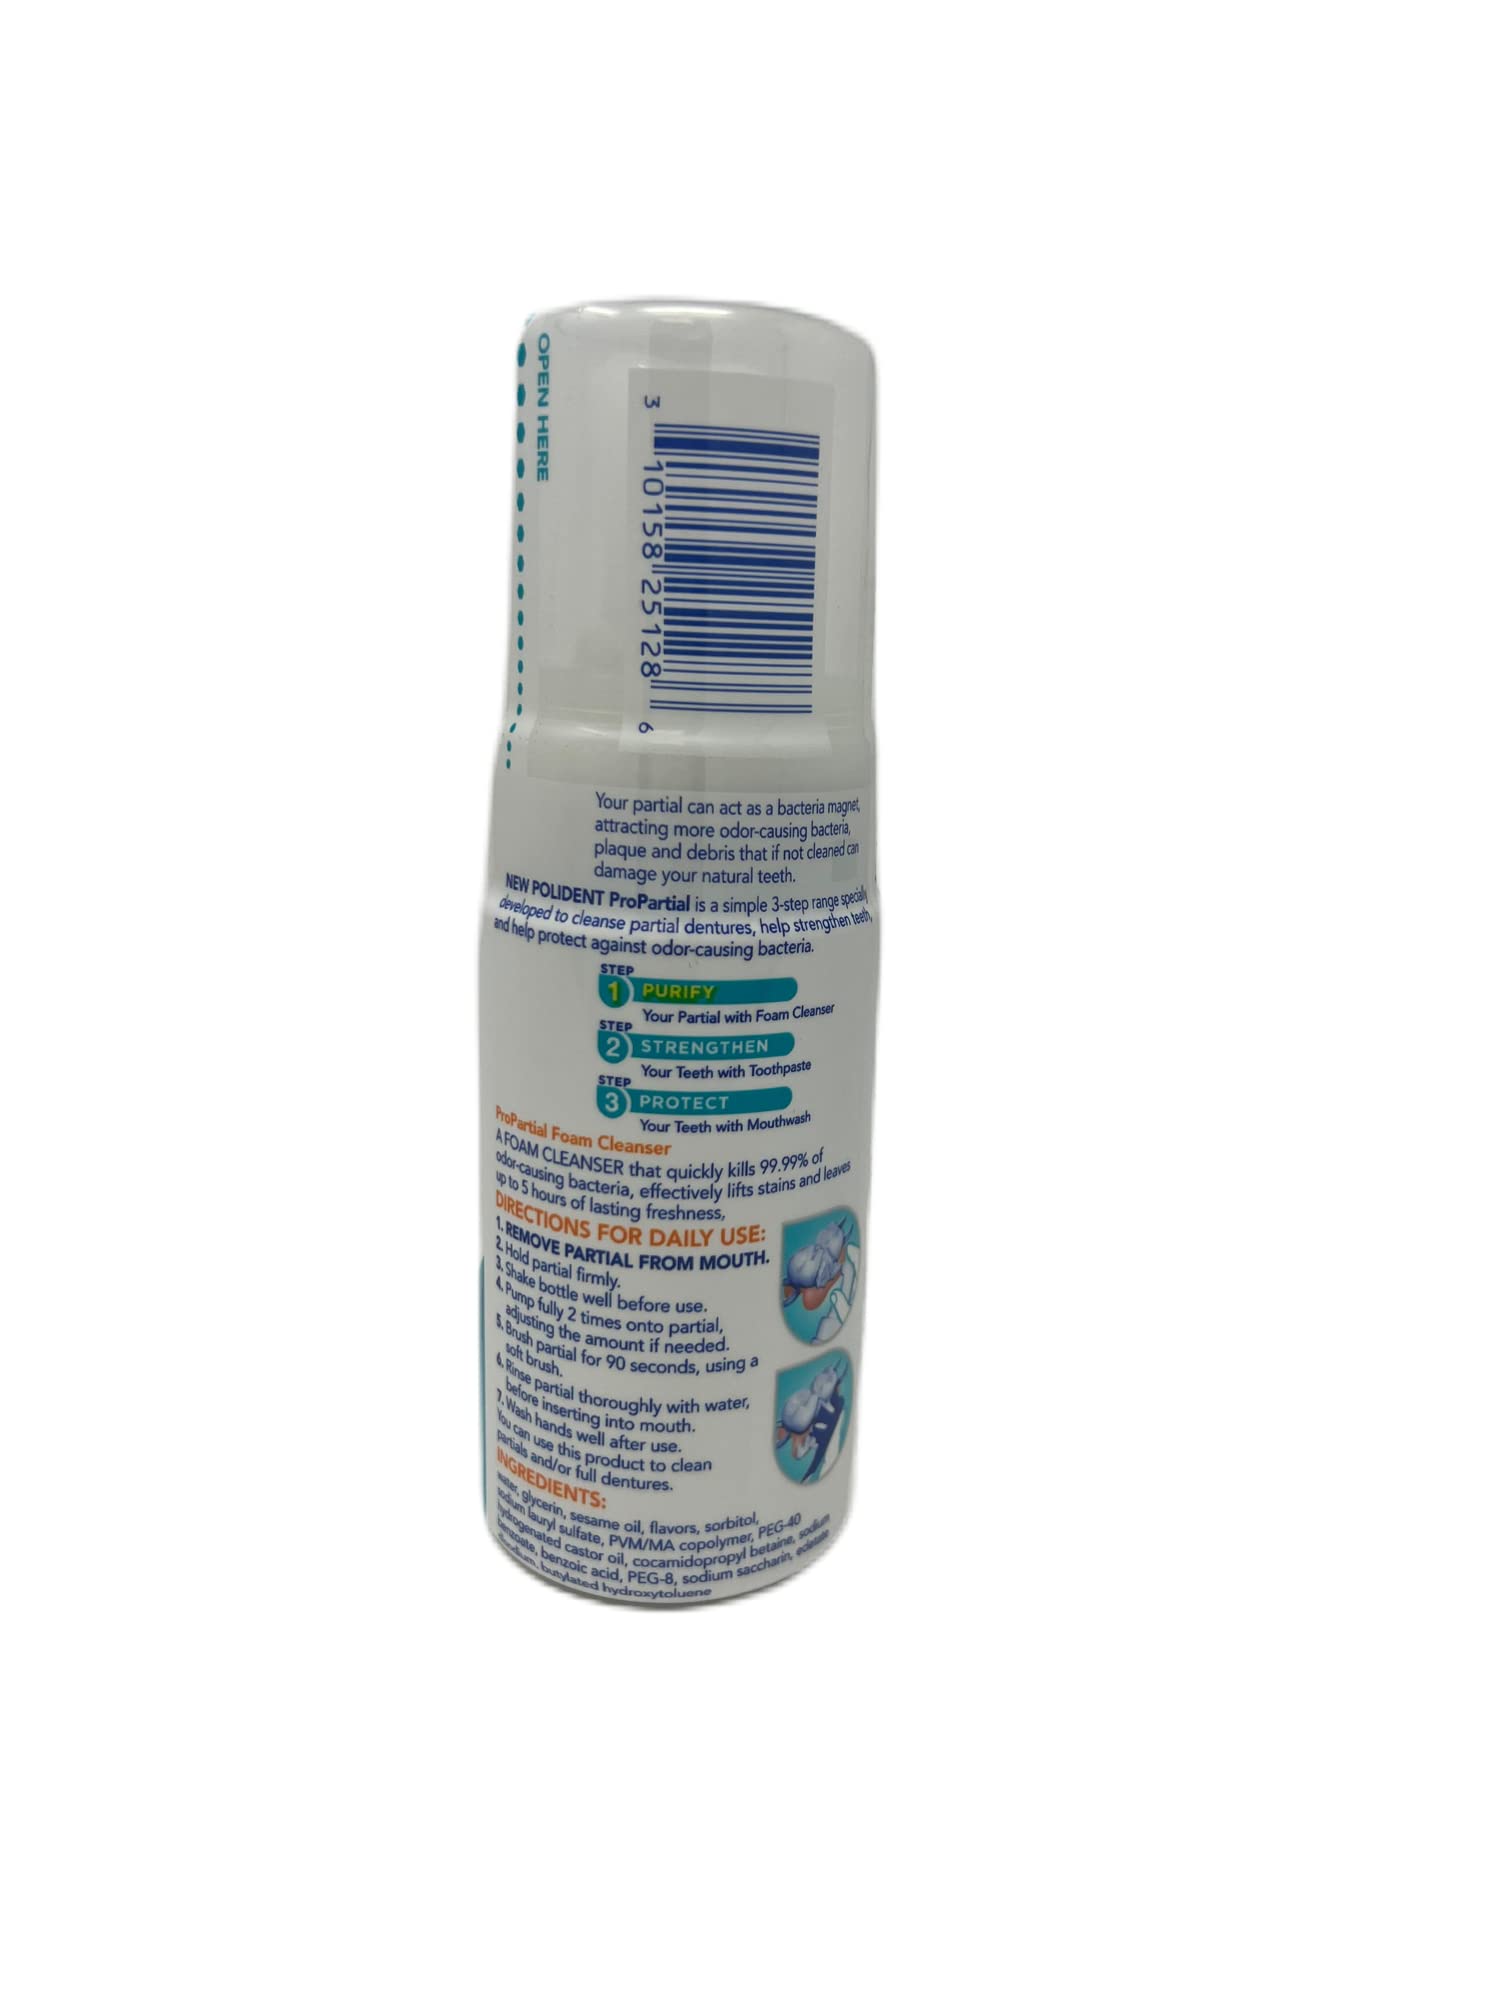 Polident Propartial Step 1 Antibacterial Partial Denture Cleanser Foam, 4.2 Oz, 3 Pack